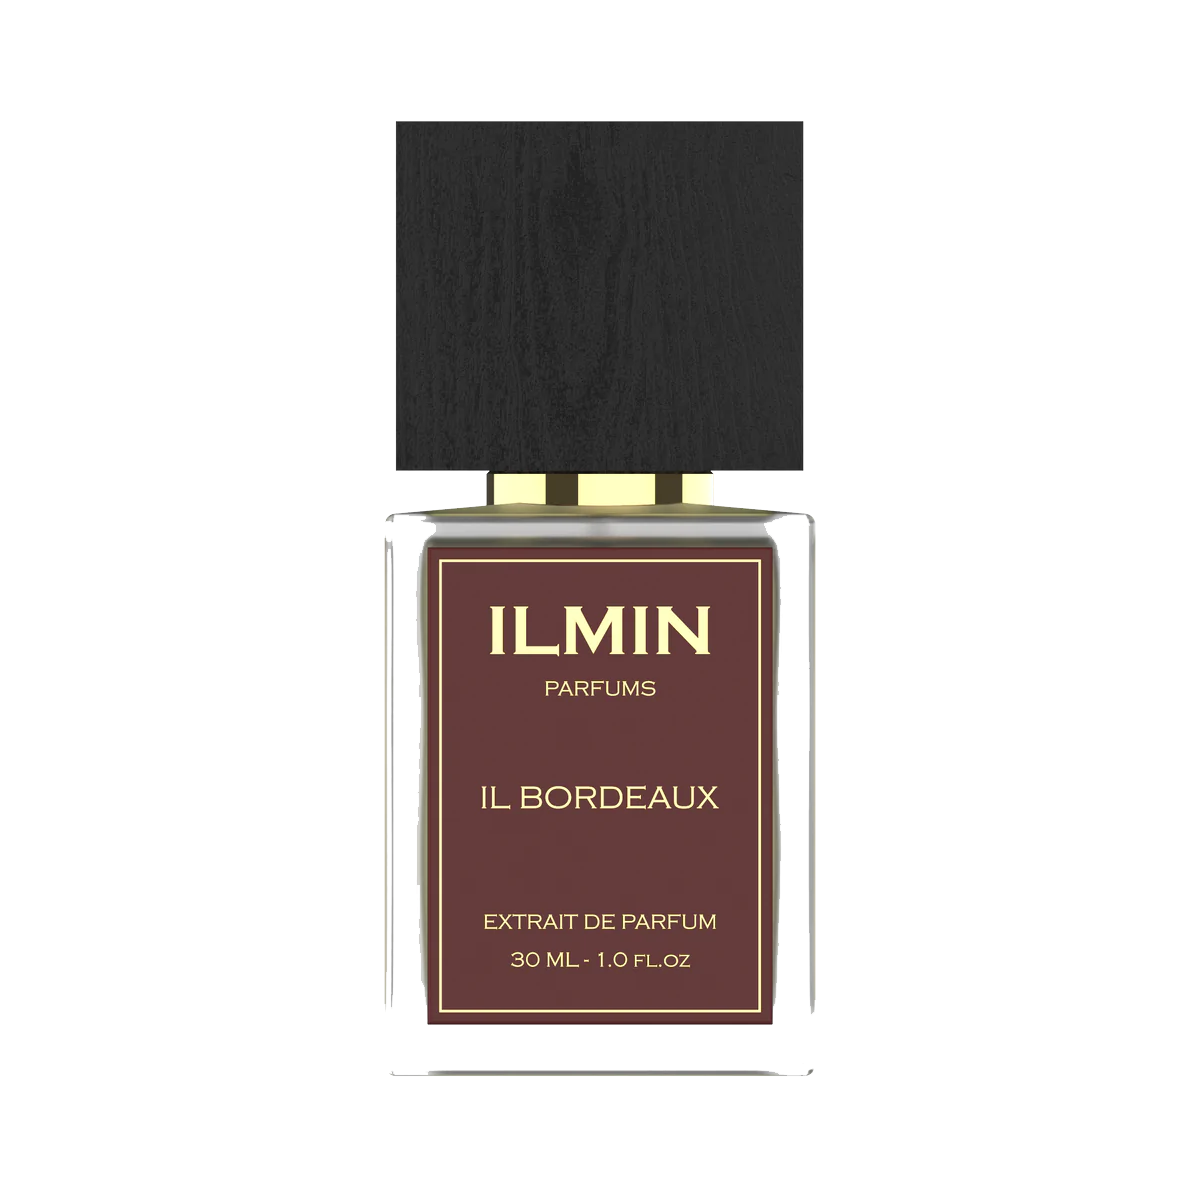 <meta charset="utf-8"><b data-mce-fragment="1">Il Bordeaux</b><span data-mce-fragment="1"> by </span><b data-mce-fragment="1">ILMIN Parfums</b><span data-mce-fragment="1"> is a Floral Fruity fragrance for women and men. This is a new fragrance. </span><b data-mce-fragment="1">Il Bordeaux</b><span data-mce-fragment="1"> was launched in 2021. Top notes are Coconut and Peach; middle notes are Lily-of-the-Valley and Rose; base notes are Sugar, Vanilla, Patchouli, Amber and Musk.</span>